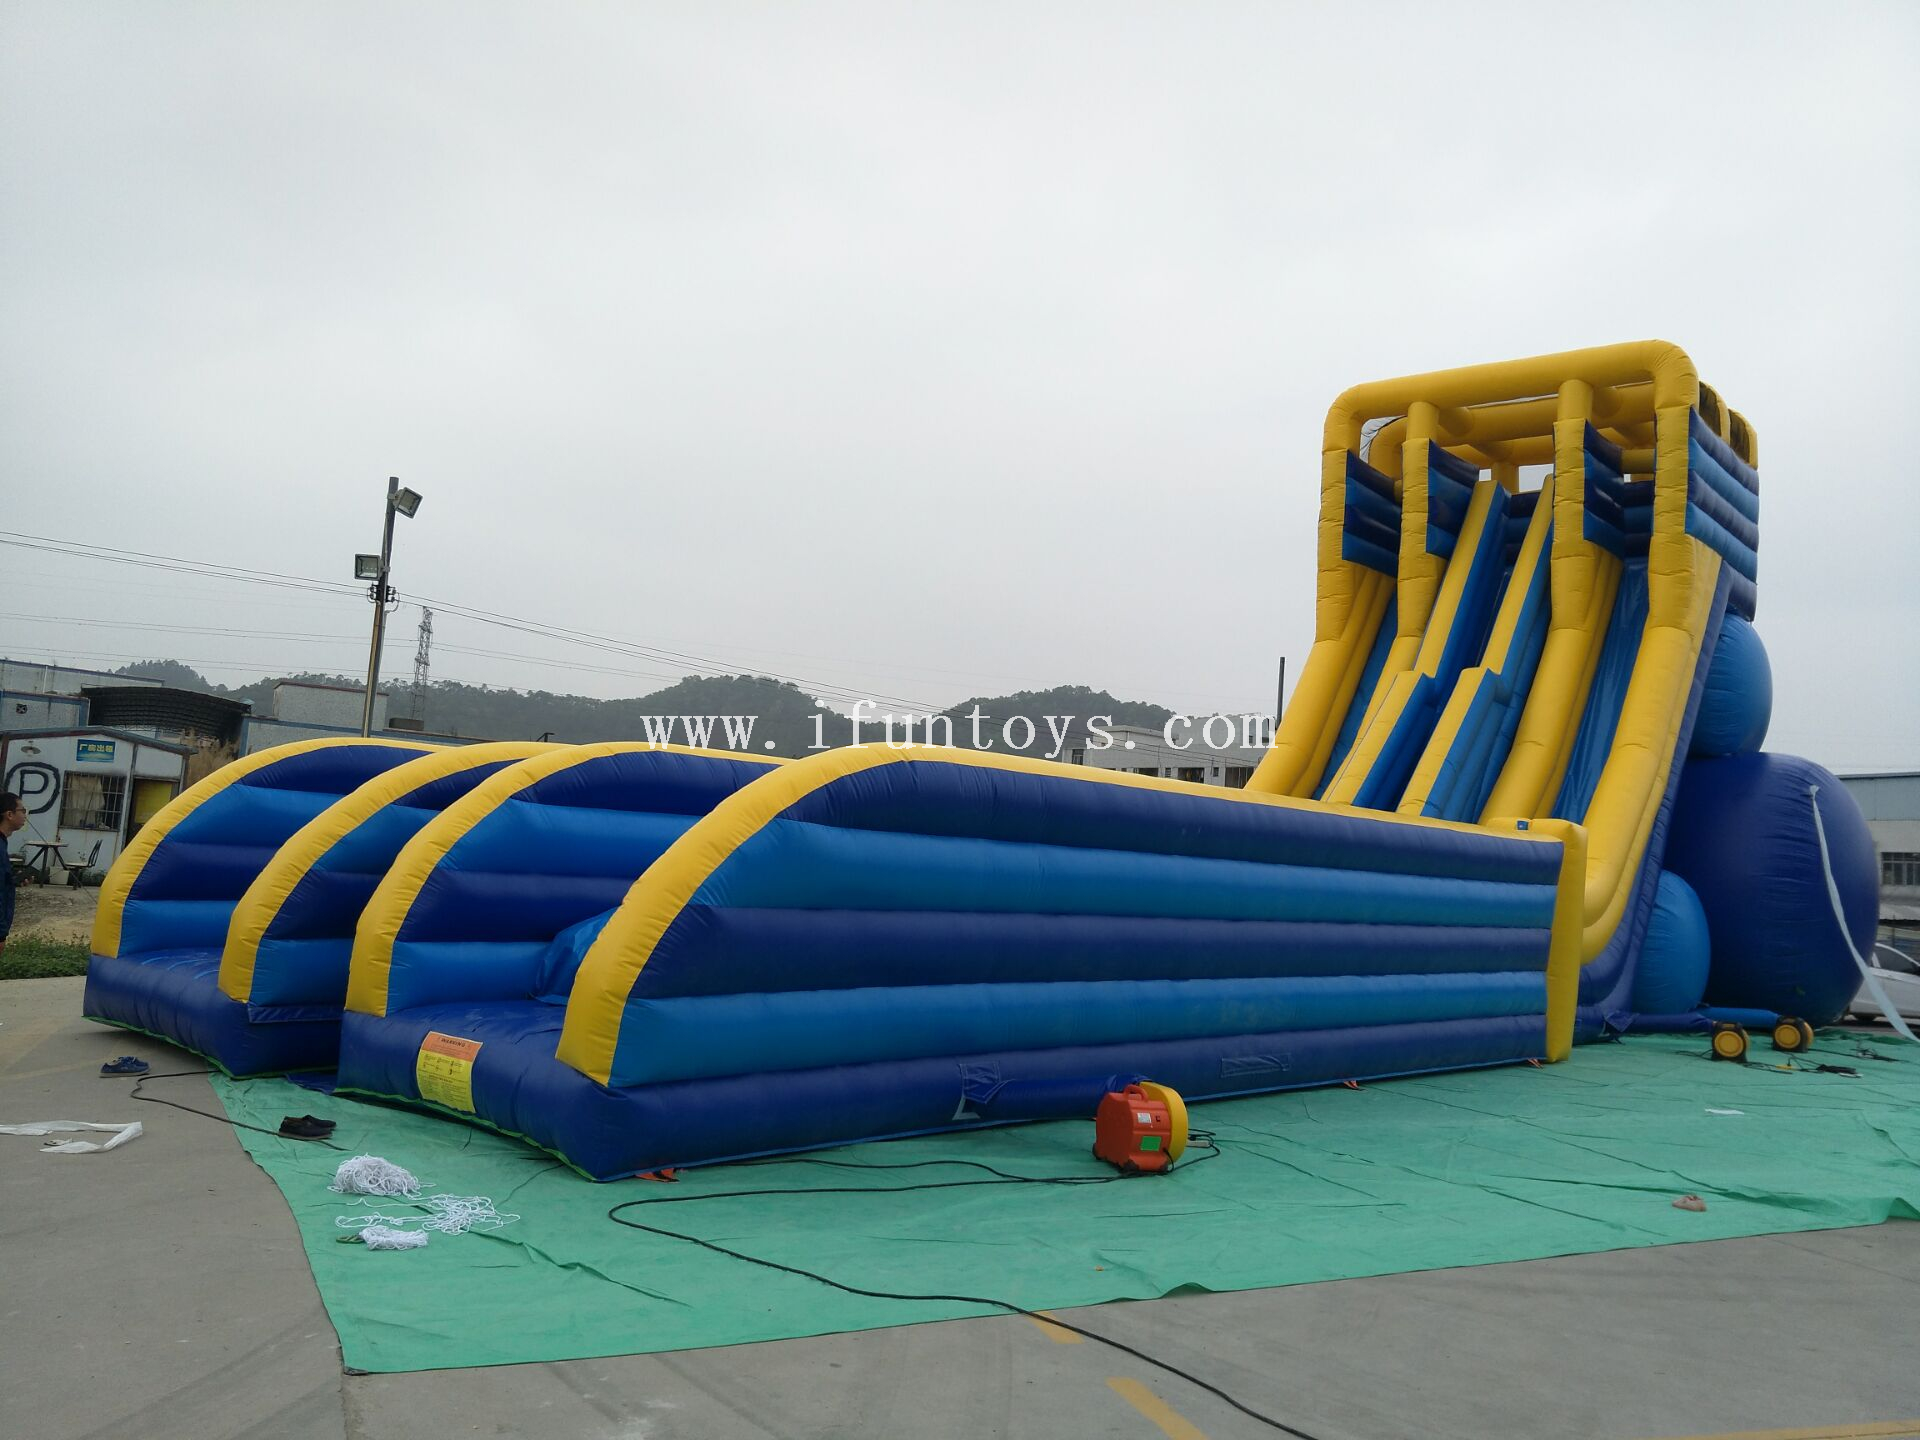 Amazing double lane free fall adult Inflatable Skyscraper Slide/ Giant Inflatable dry Slide /inflatable drop jumping slide for kids and adults